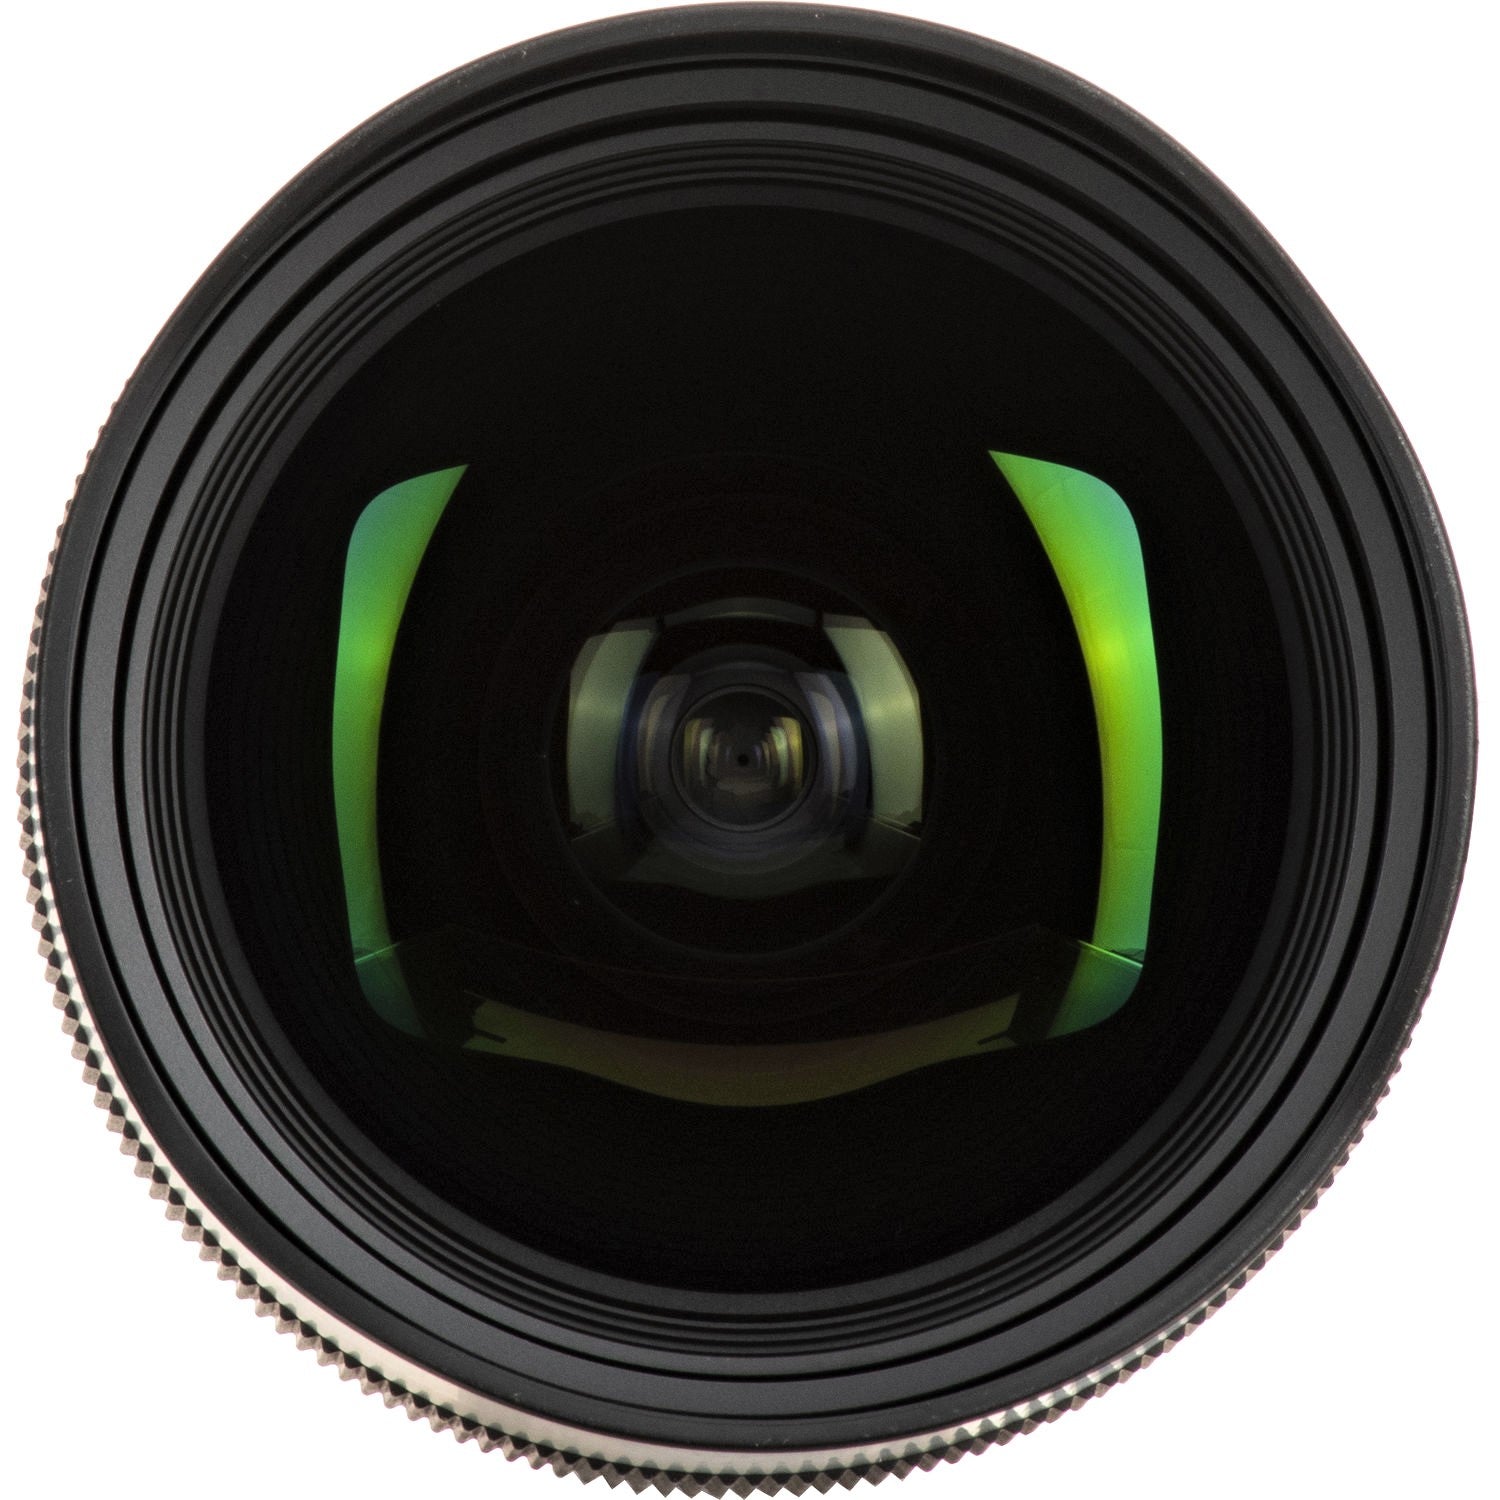 Sigma 14-24mm F2.8 Art DG DN Art Lens for Leica L Mount in a Close-Up View